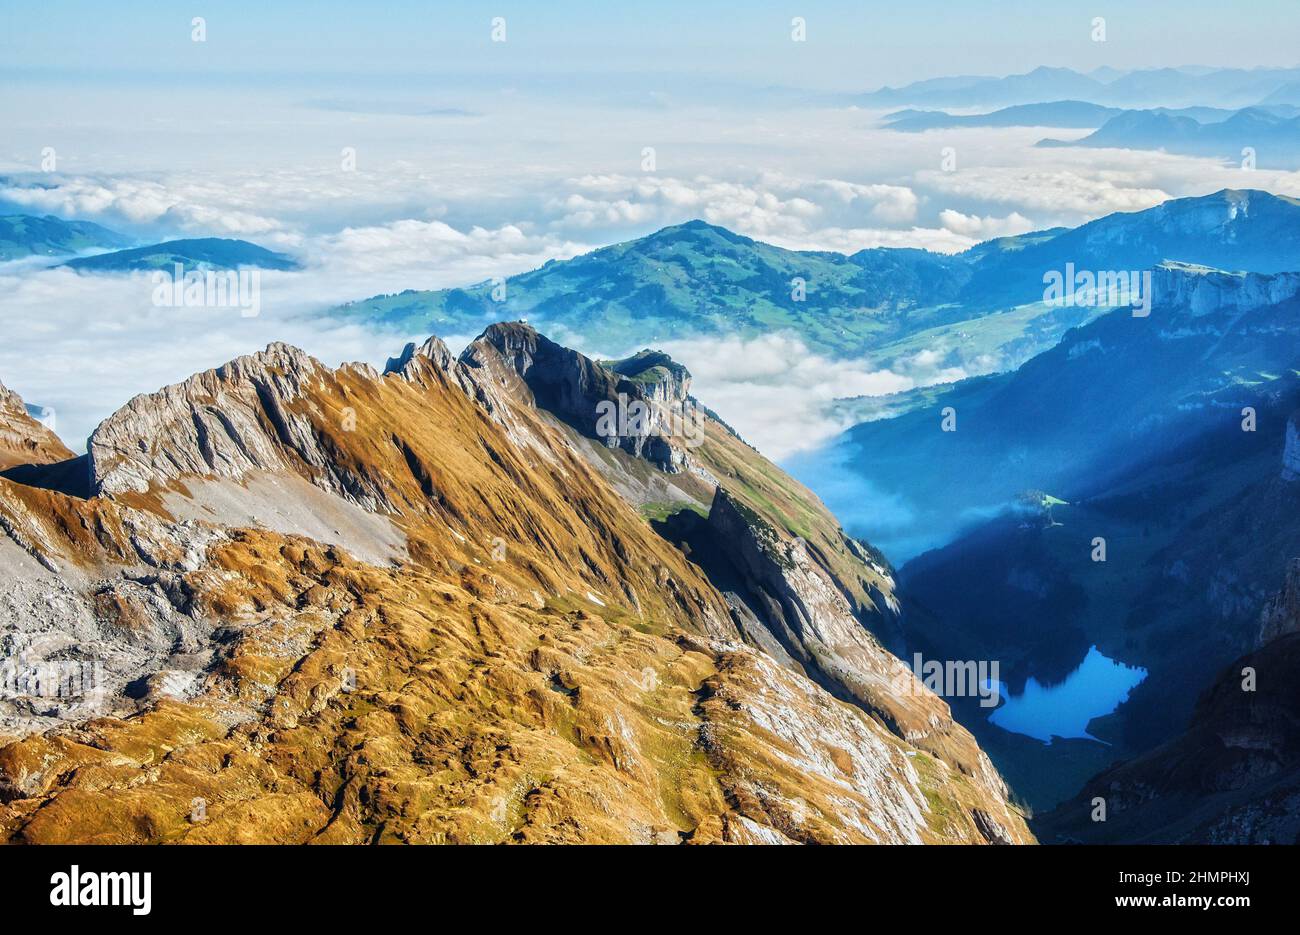 Mountain Landscape view from Mt Saentis in Appenzell Alps, Switzerland Stock Photo